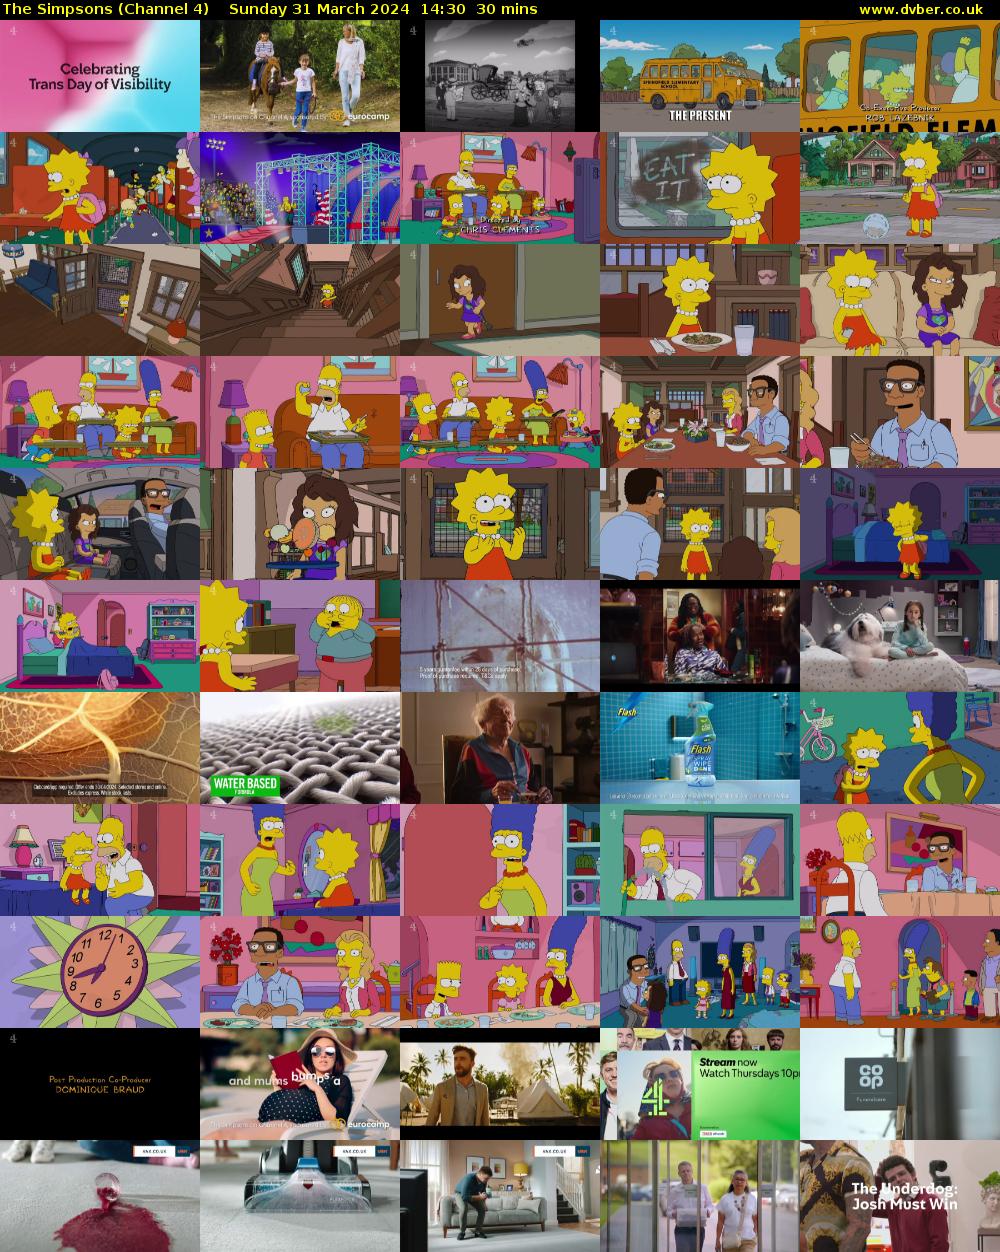 The Simpsons (Channel 4) Sunday 31 March 2024 14:30 - 15:00